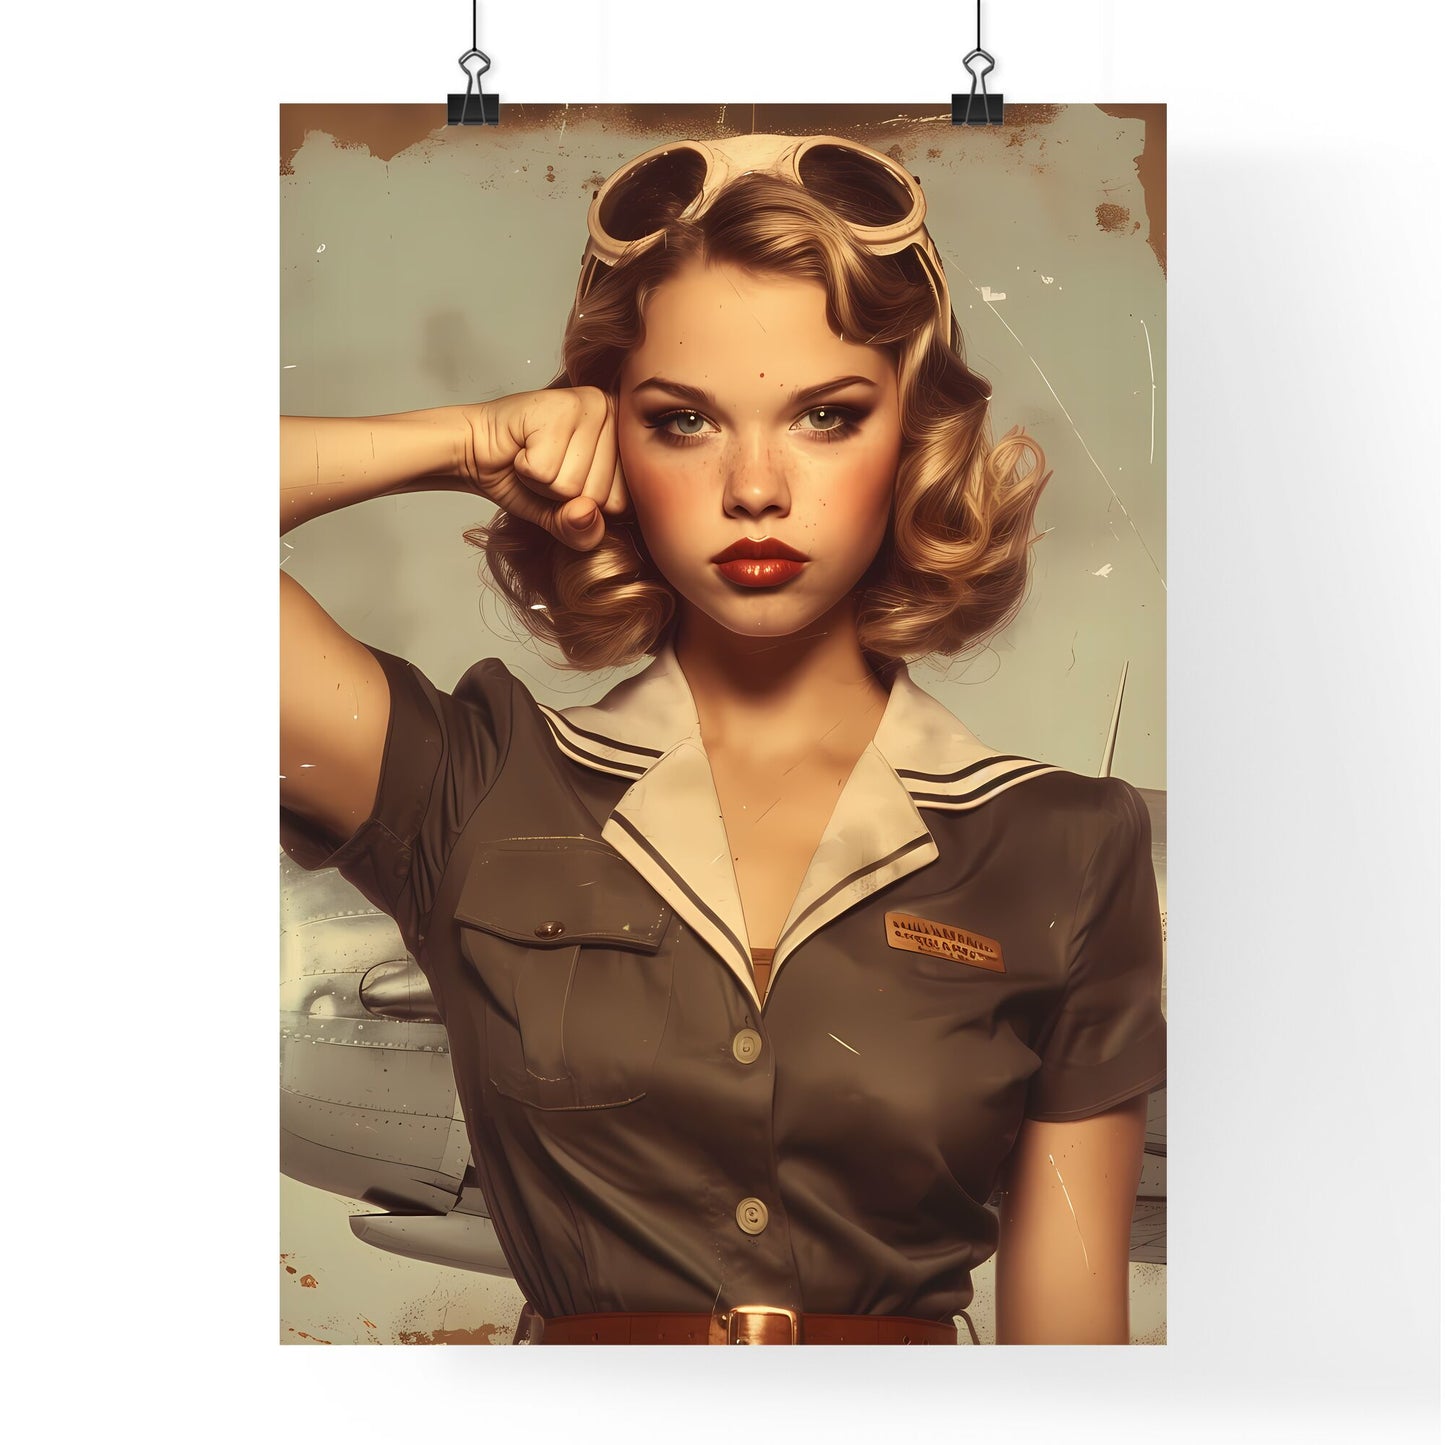 You can do it woman, vintage artwork, flexing bicep, wearing flight attendant uniform, making a serious face - Art print of a woman in uniform with her hand on her head Default Title